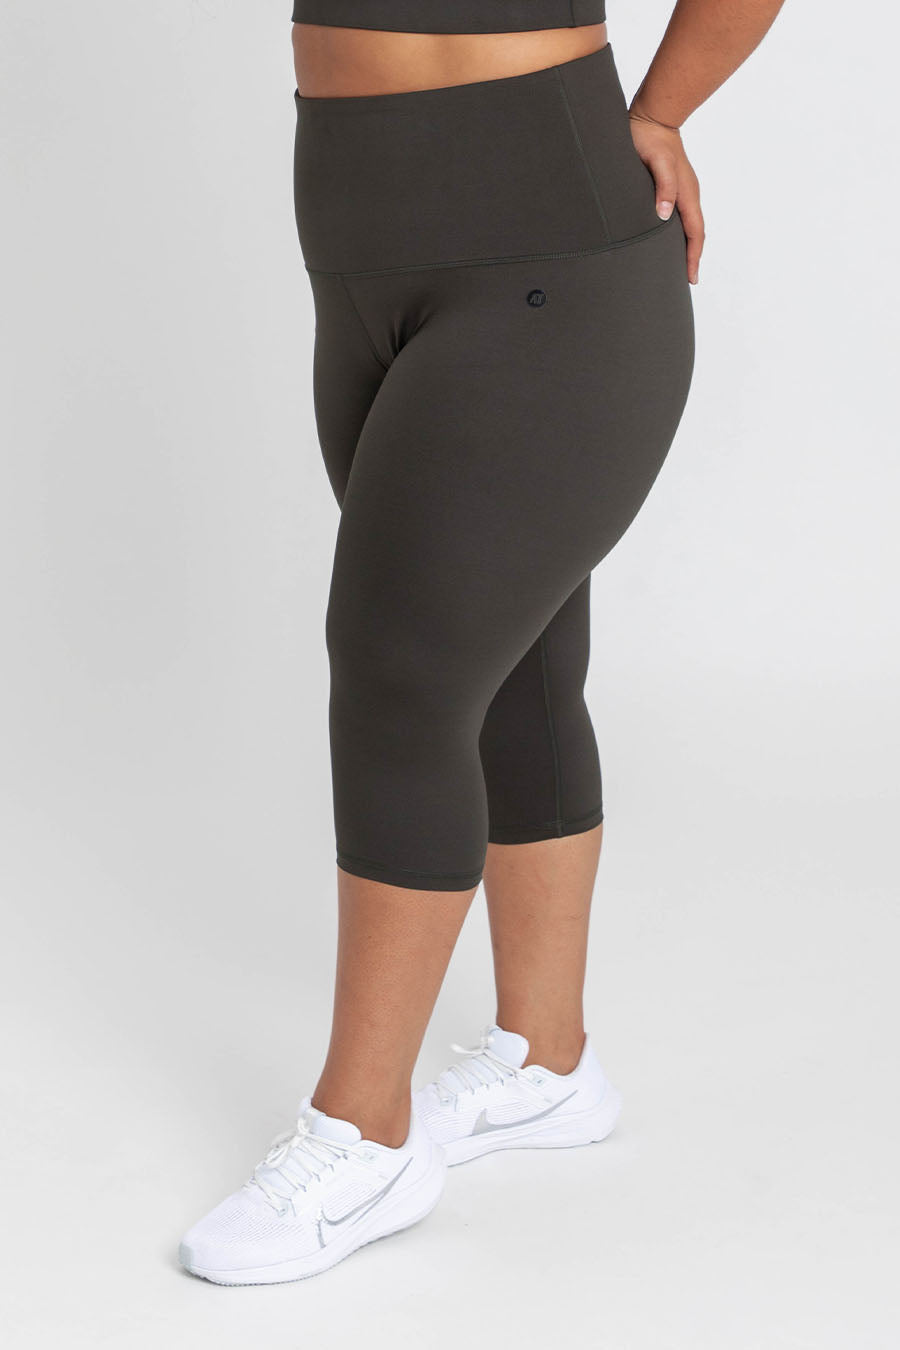 Essential 3/4 Length Tight - Forest Night